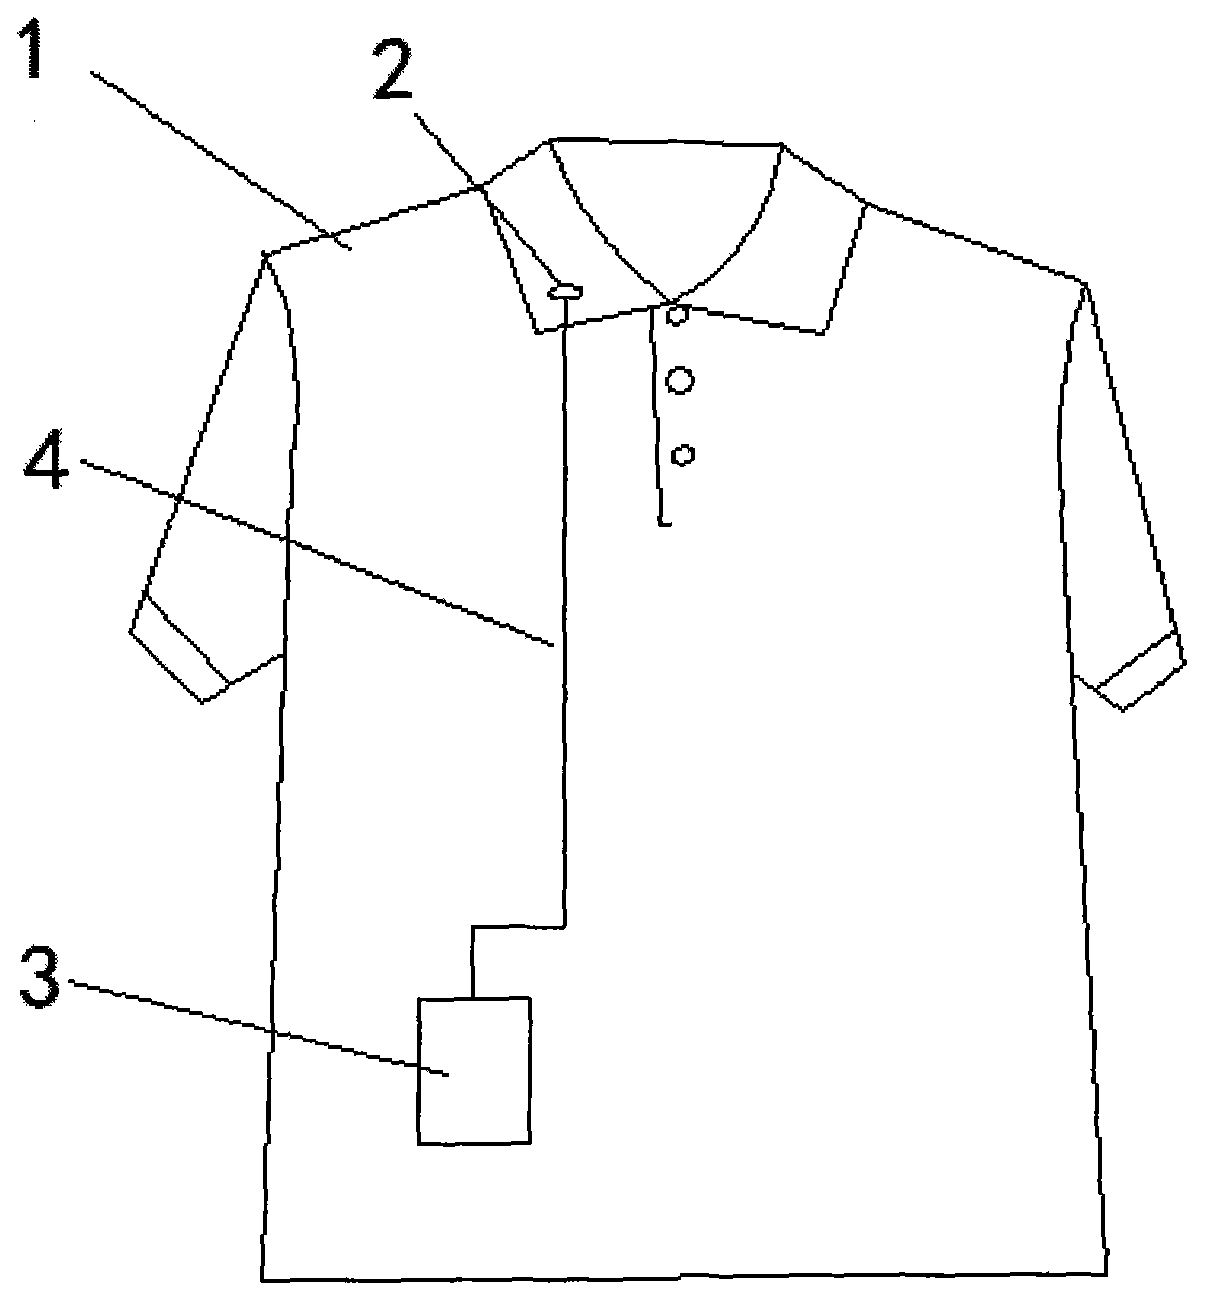 Water absorbing and guiding clothing with loudspeaker